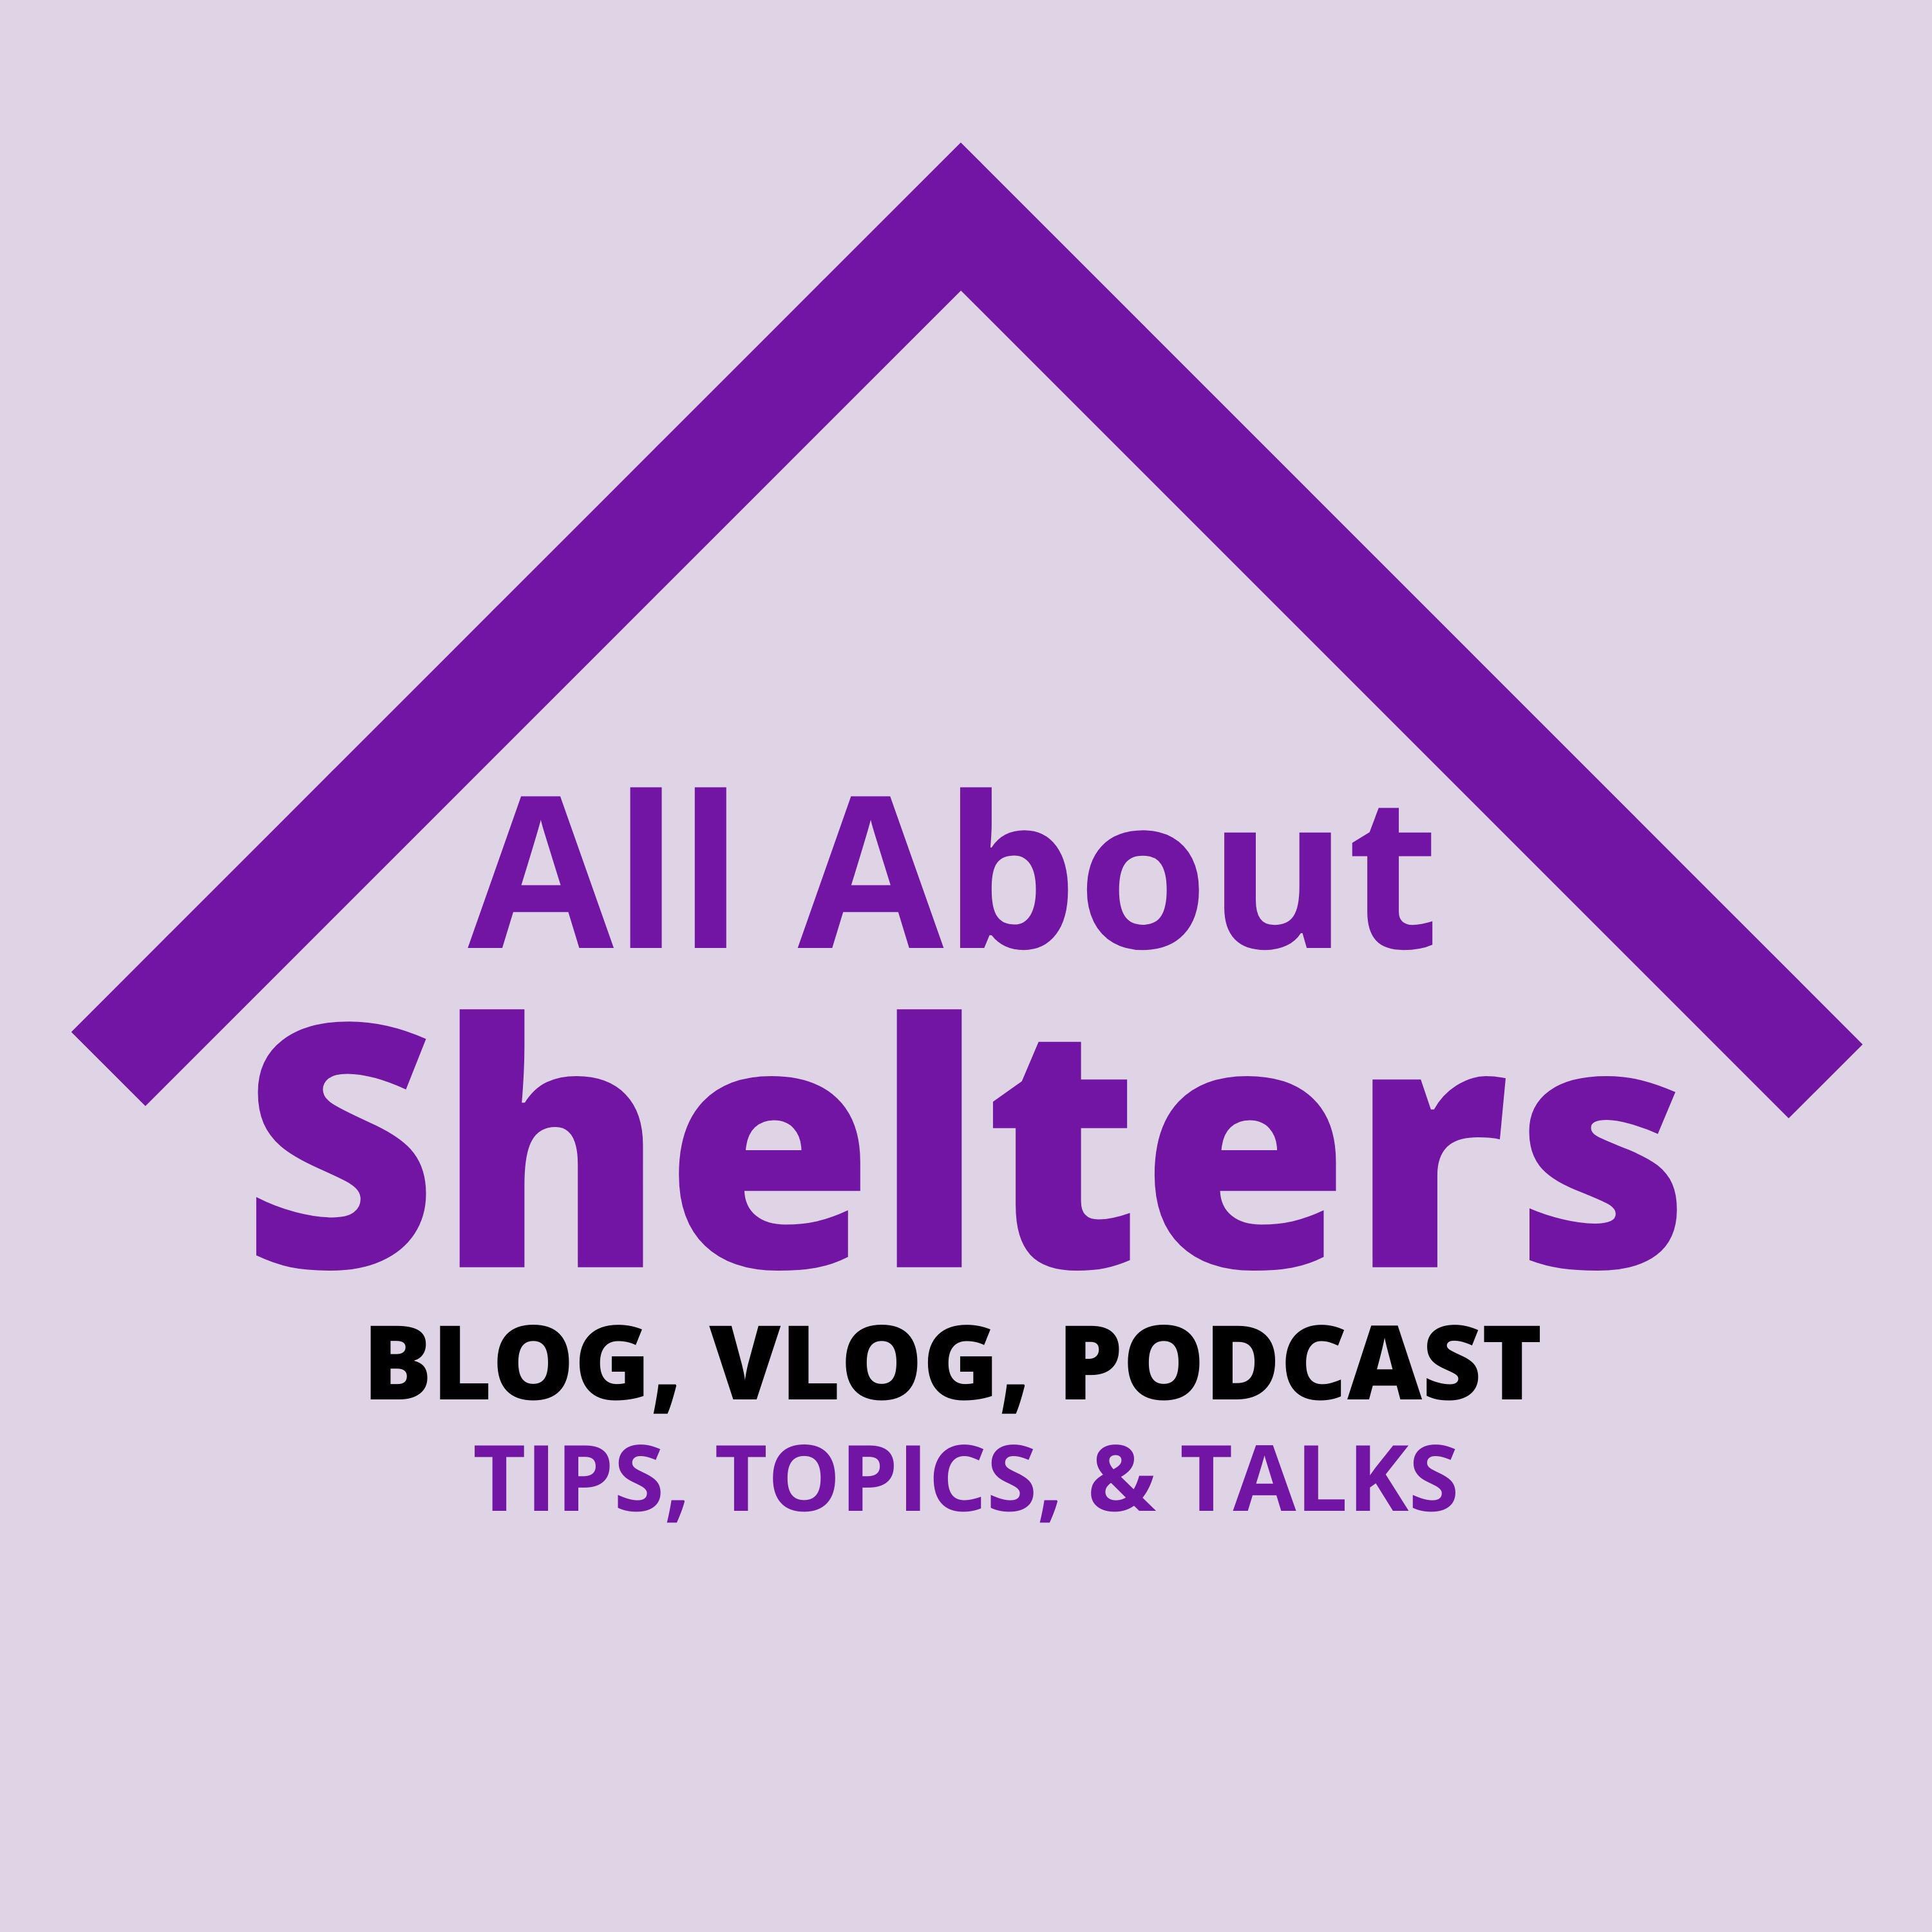 ALL ABOUT SHELTERS